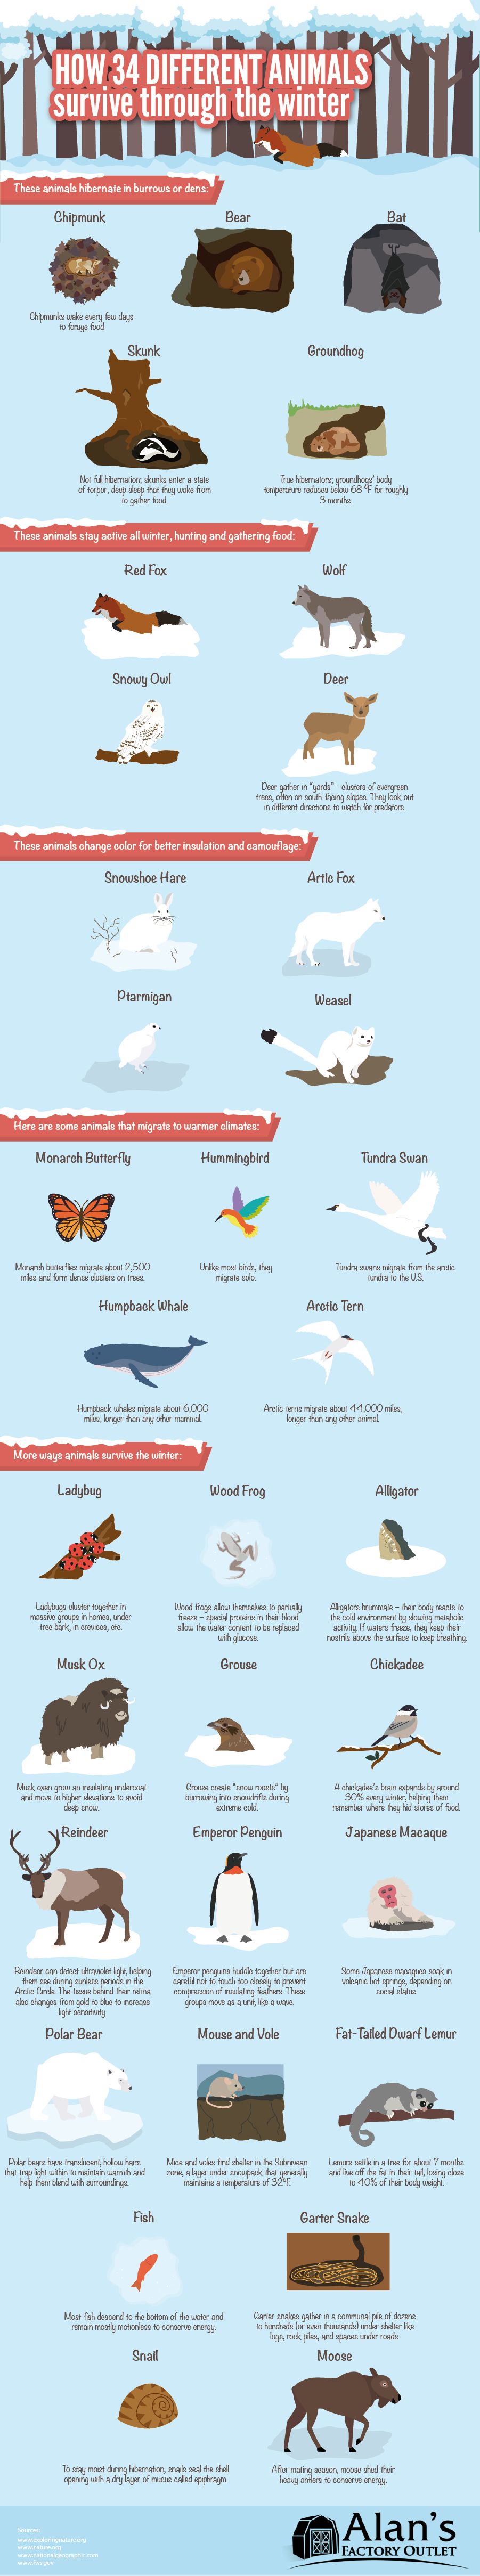 How 34 Different Animals Survive the Winer #Infographic